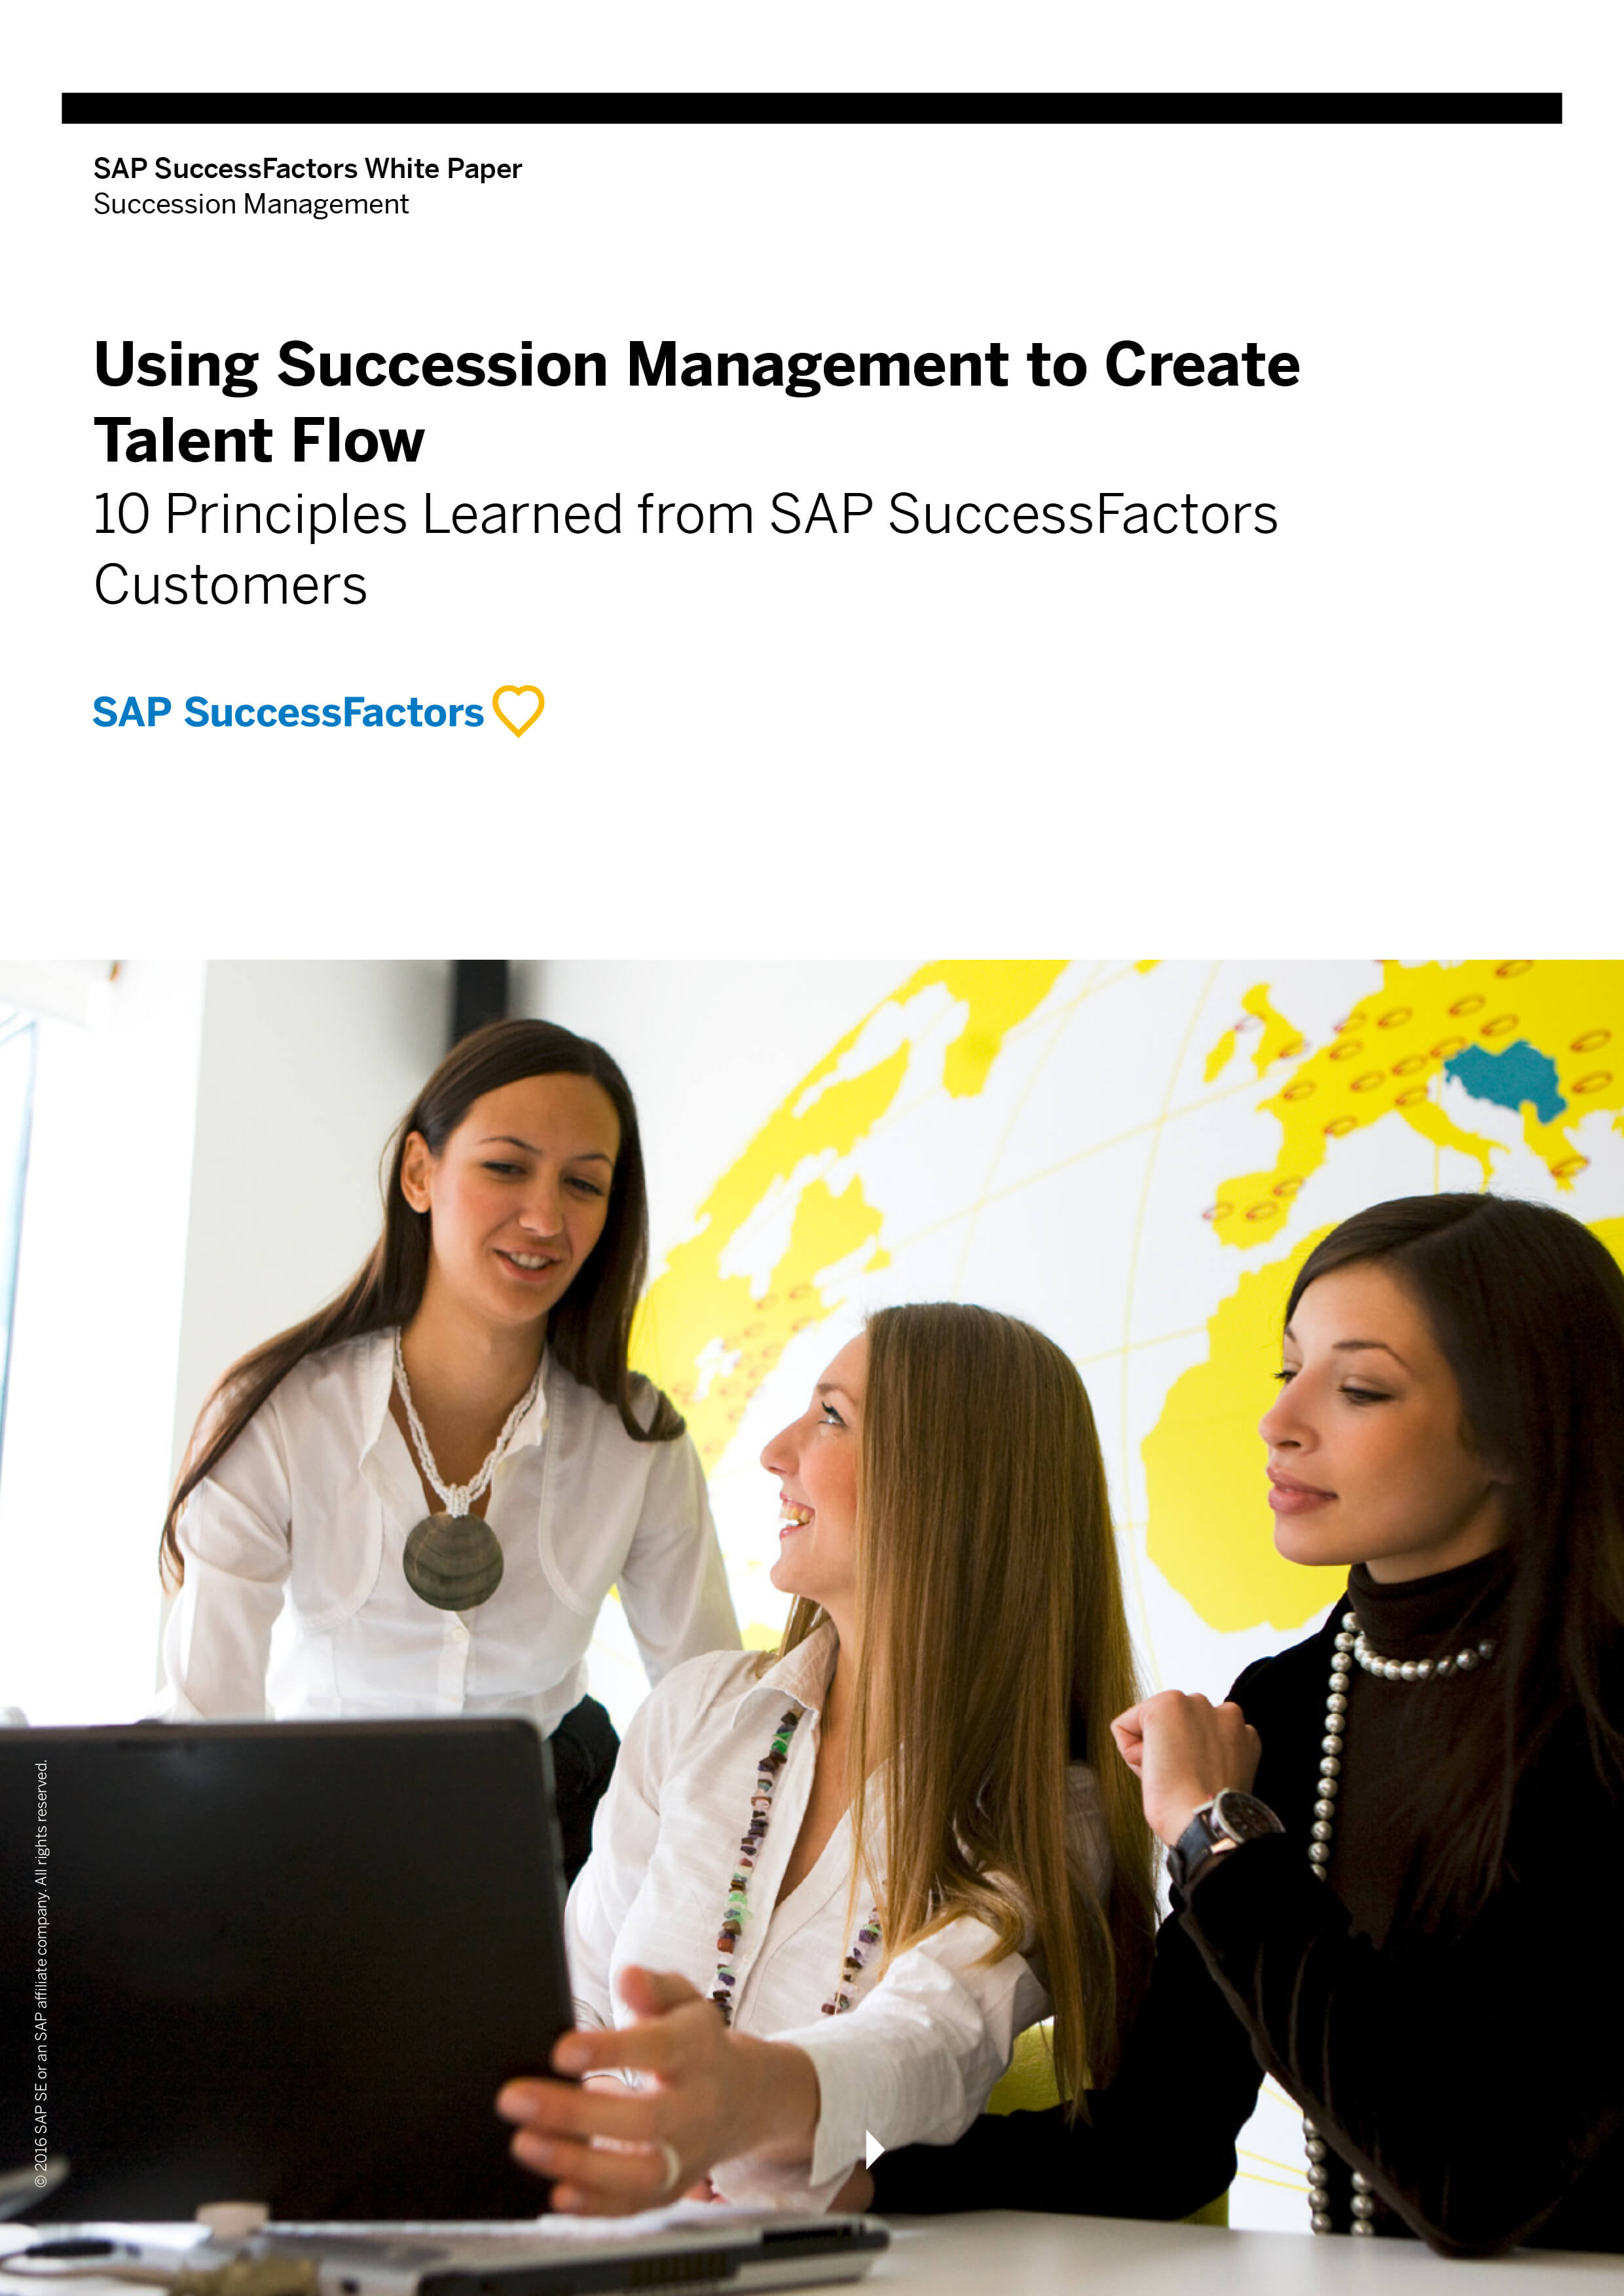 Using succession management to create talent flow